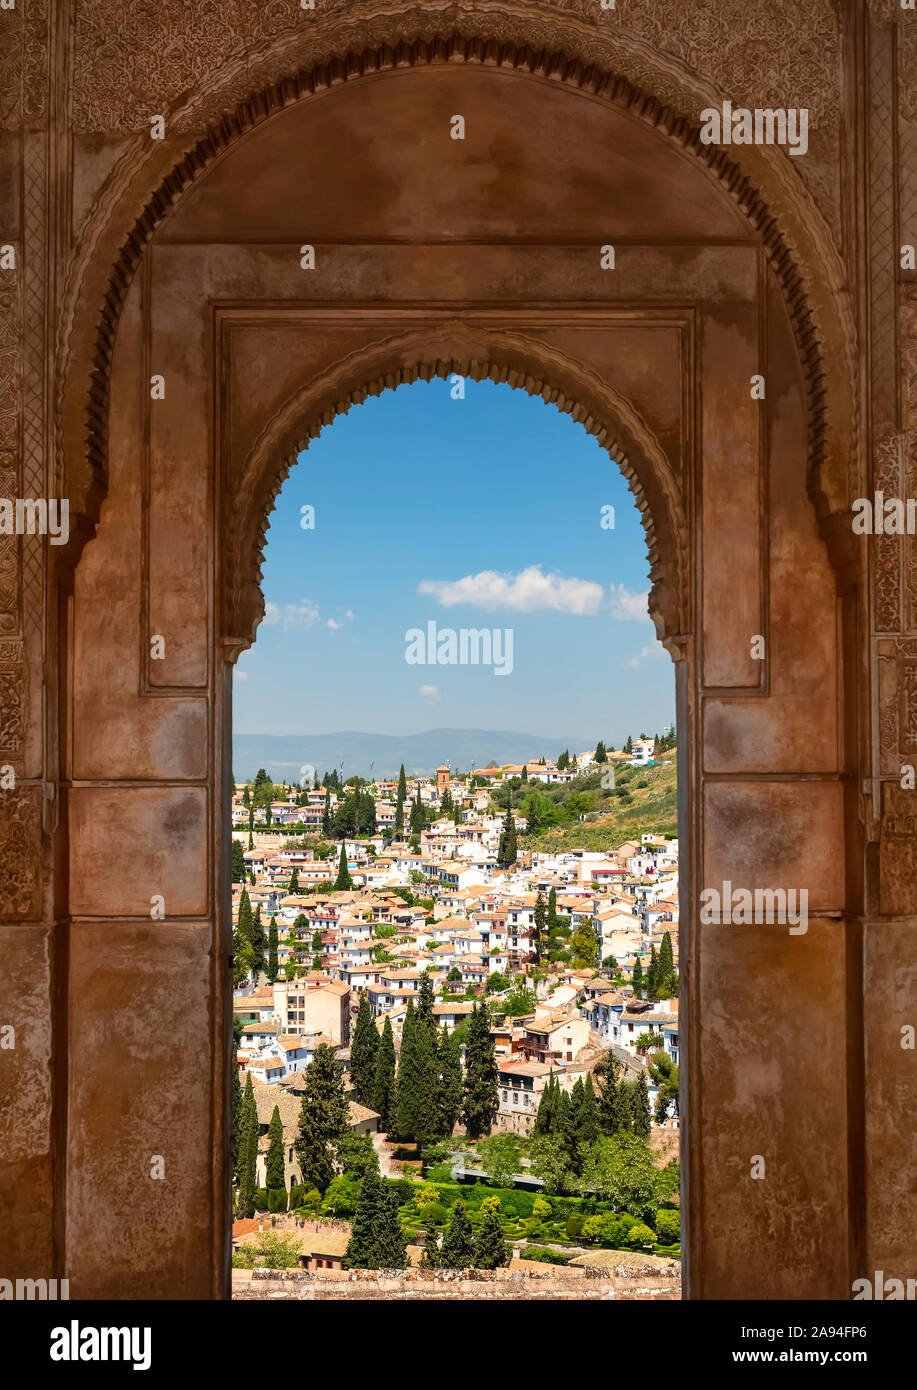 Arched window with a view from Alhambra; Granada, Andalusia, Spain Stock Photo